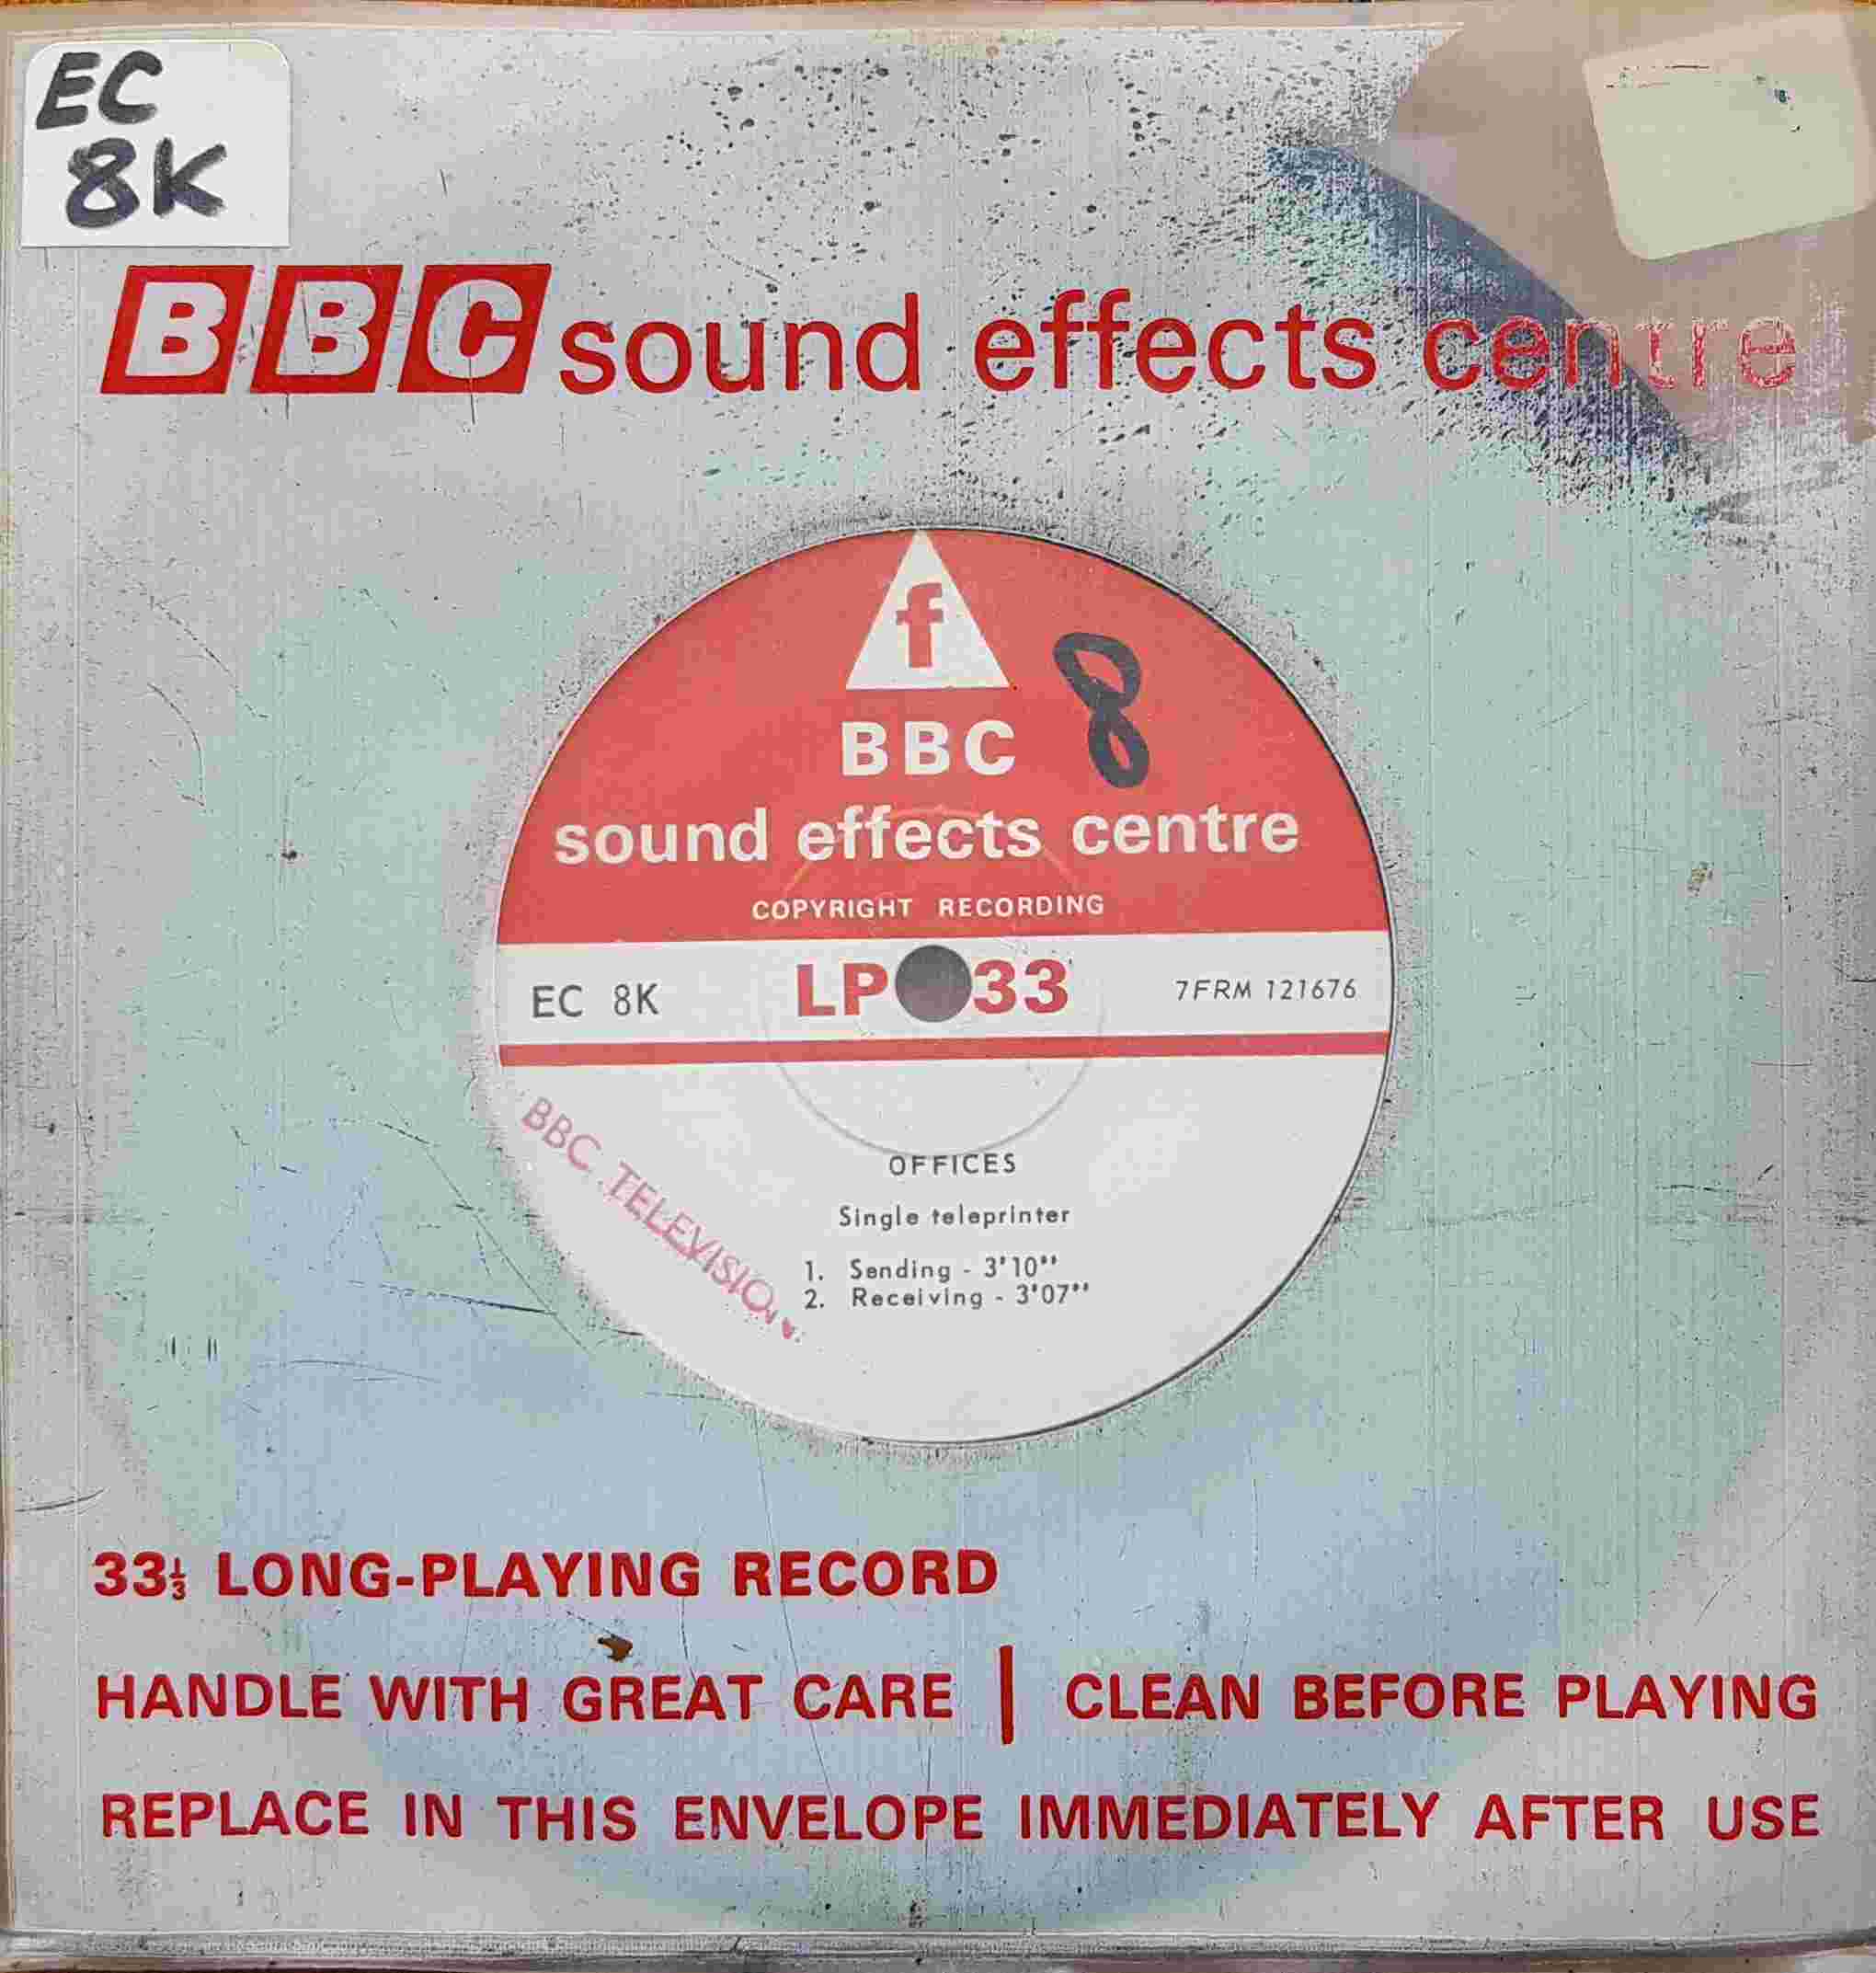 Picture of EC 8K Offices by artist Not registered from the BBC singles - Records and Tapes library